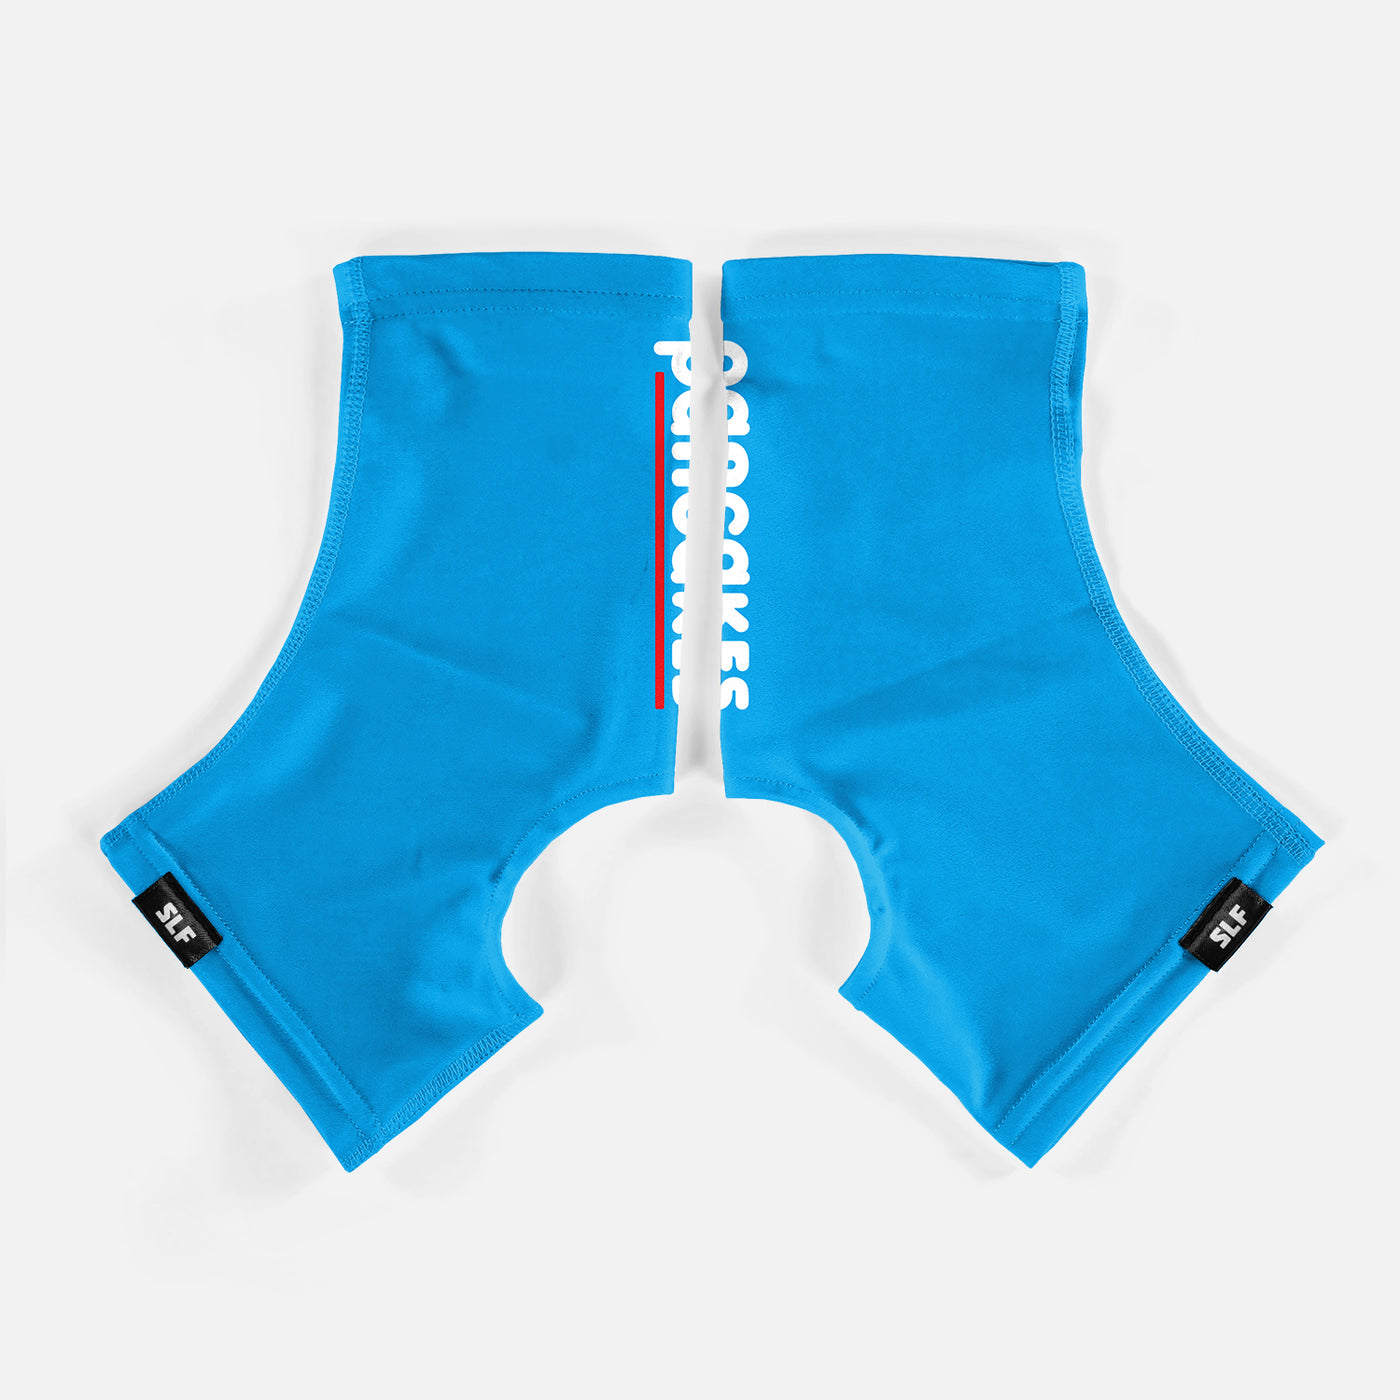 Pancakes Spats / Cleat Covers - Big